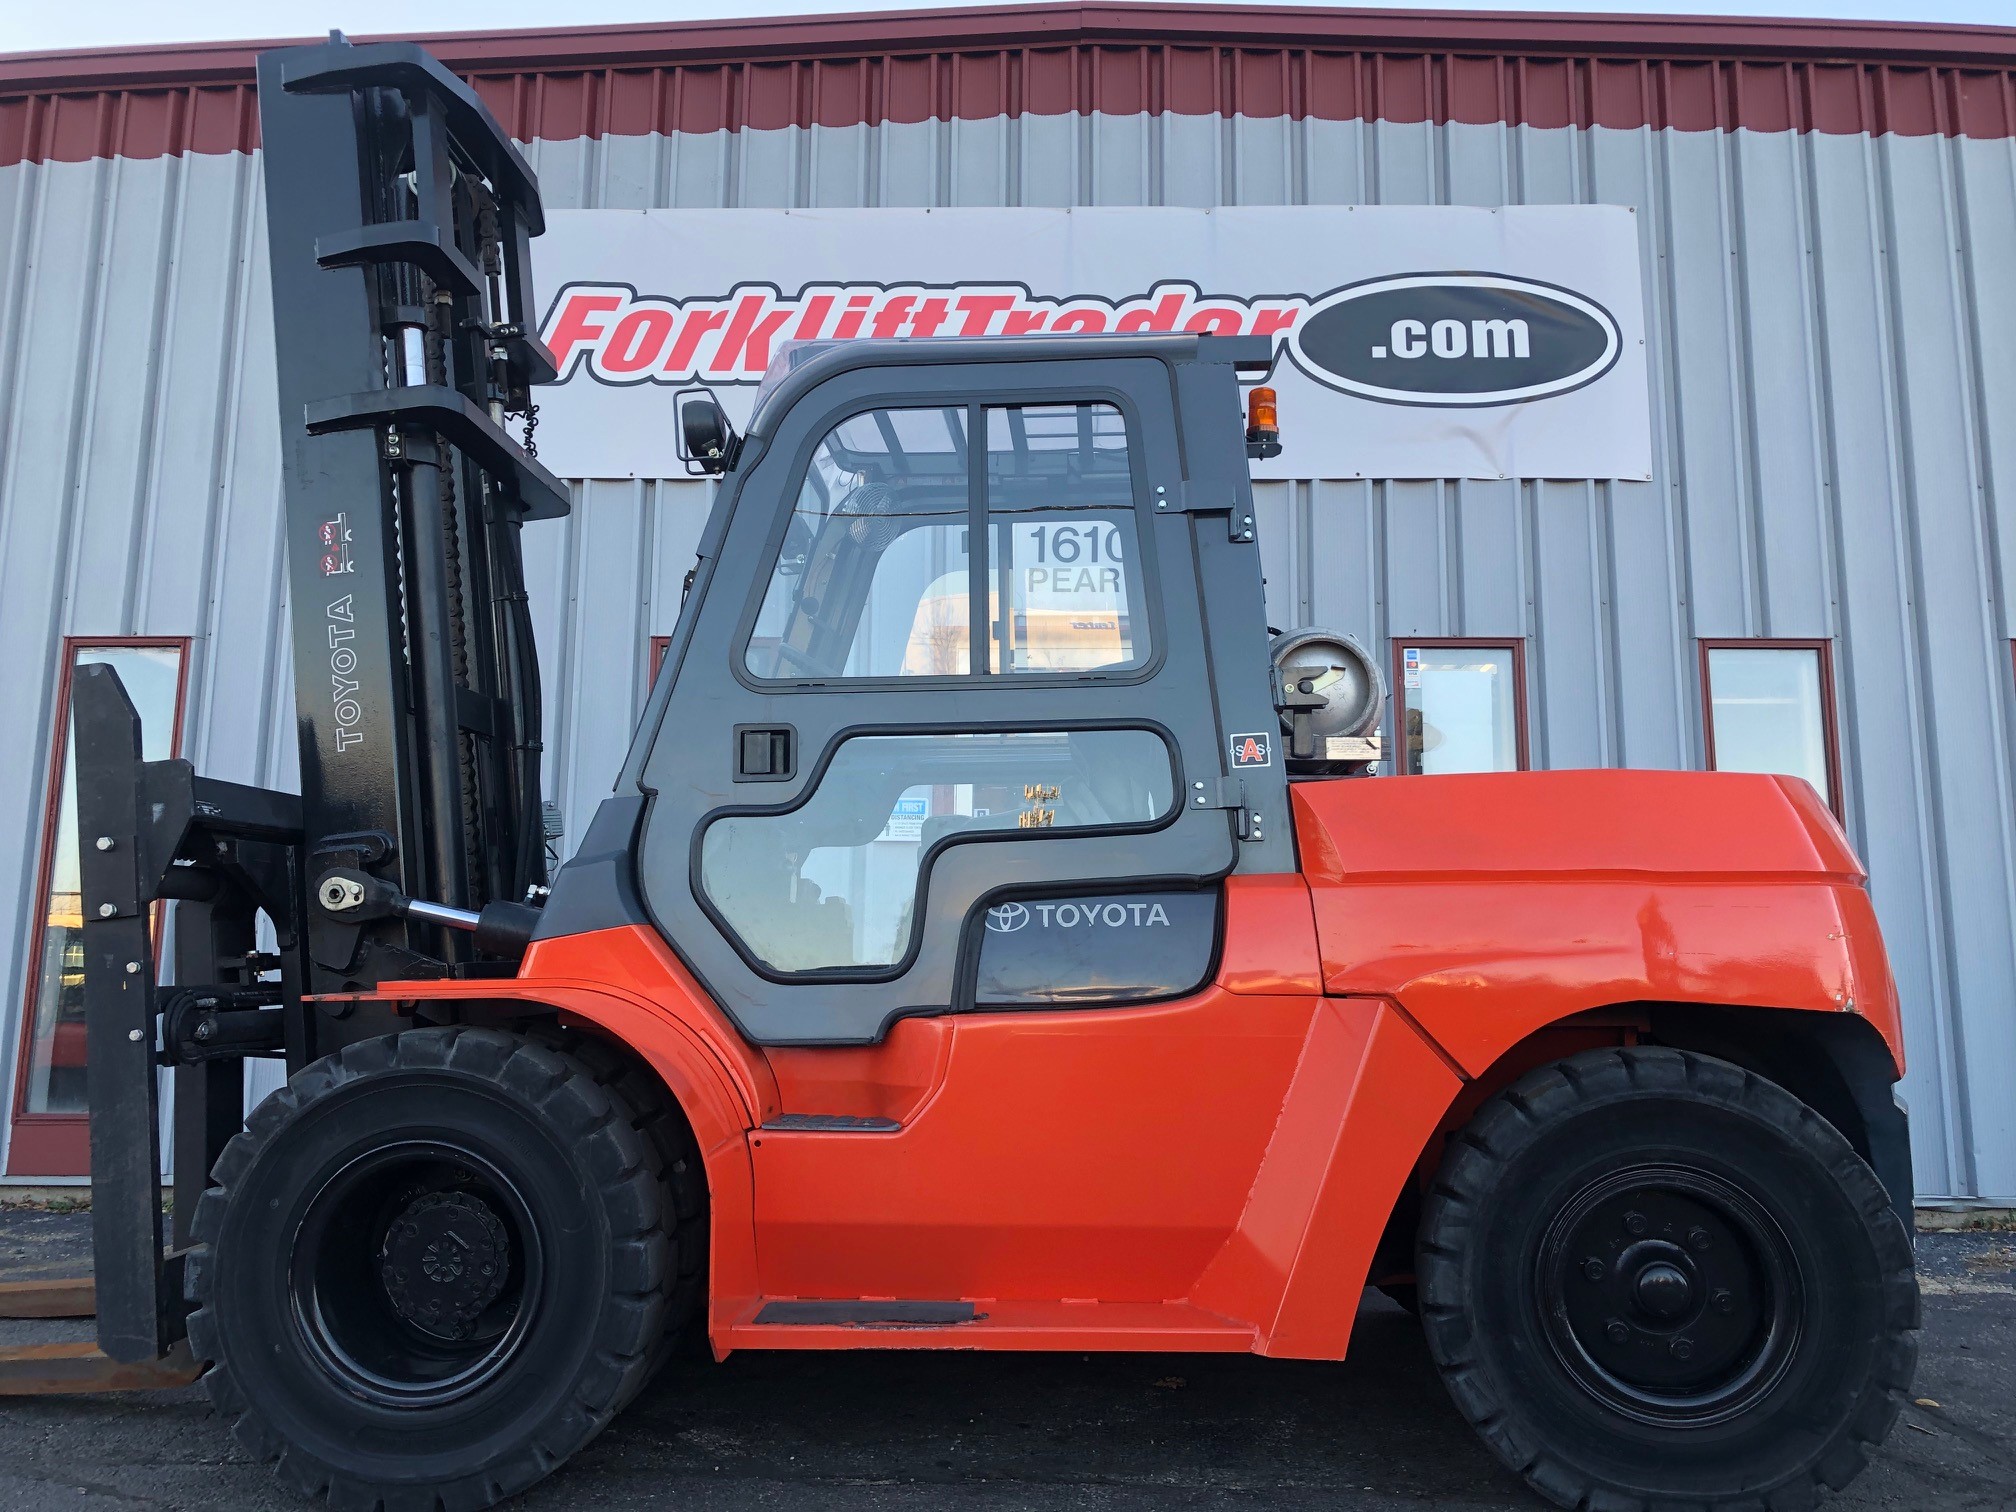 Buy Used Toyota Forklifts Reconditioned Fork Trucks For Sale Forklifttrader Com M W Industrial Equipment Co Waukesha Wisconsin